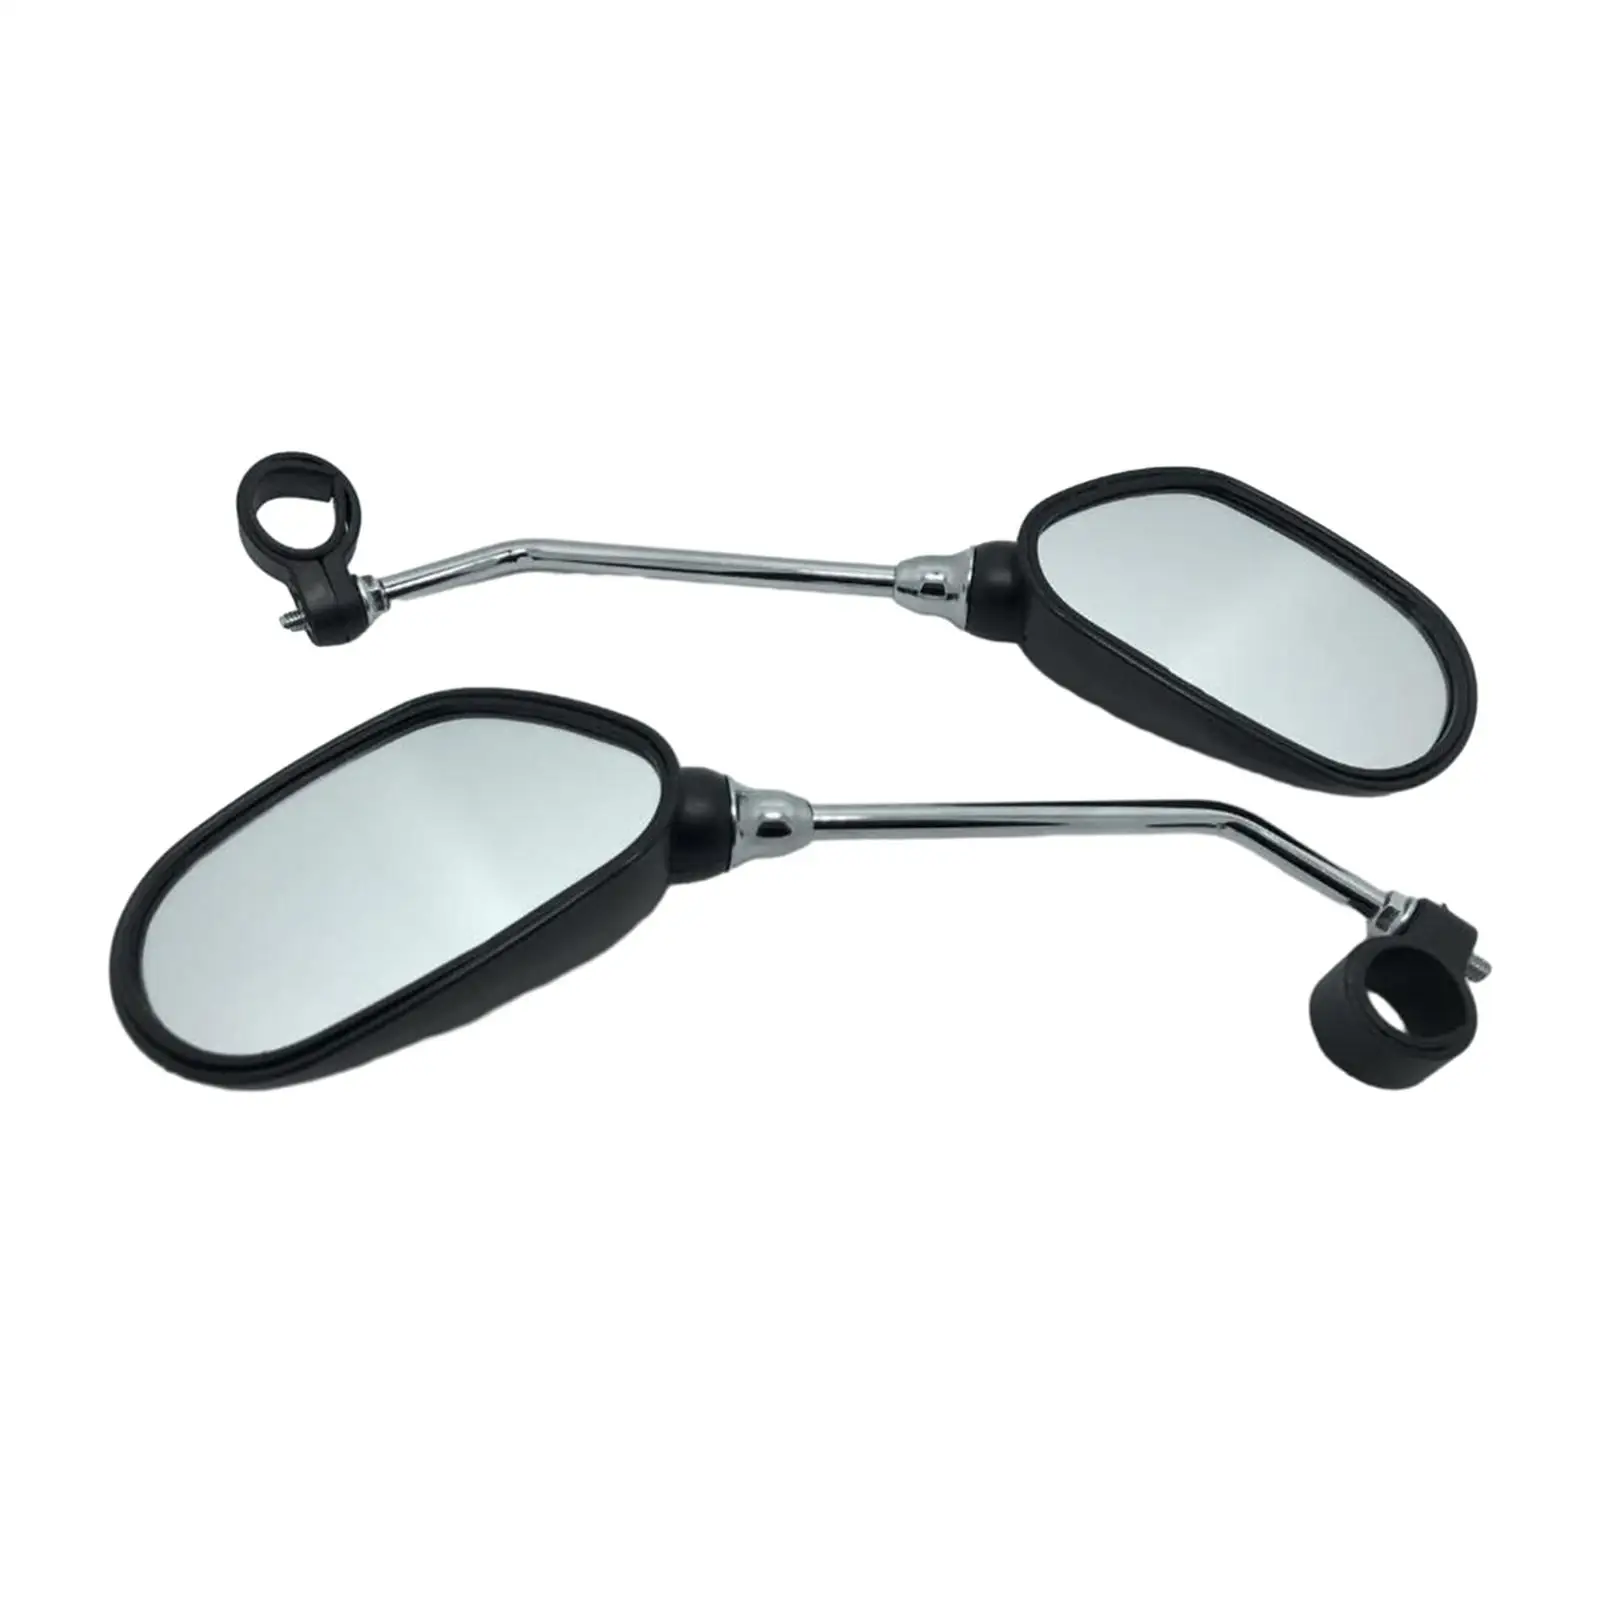 Bike Mirror, Bicycle Rear View Mirror for Handlebars, Safety Mirror for Motorbike, Mountain Road Bike